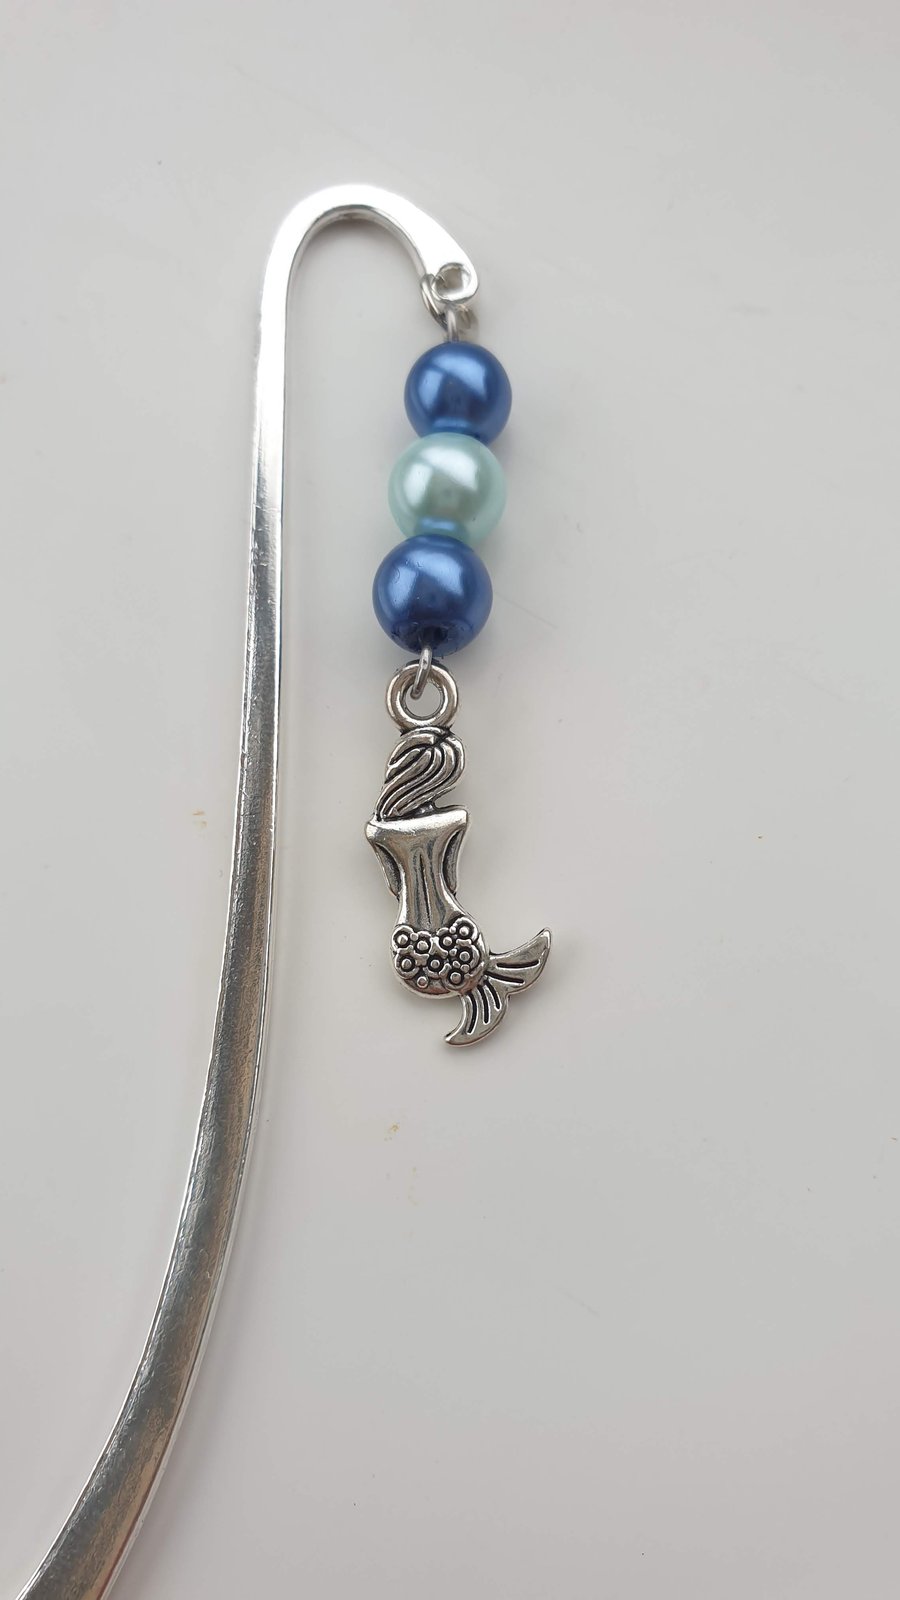 Silver-plated Metal Bookmark with Blue Beads and a Mermaid Charm